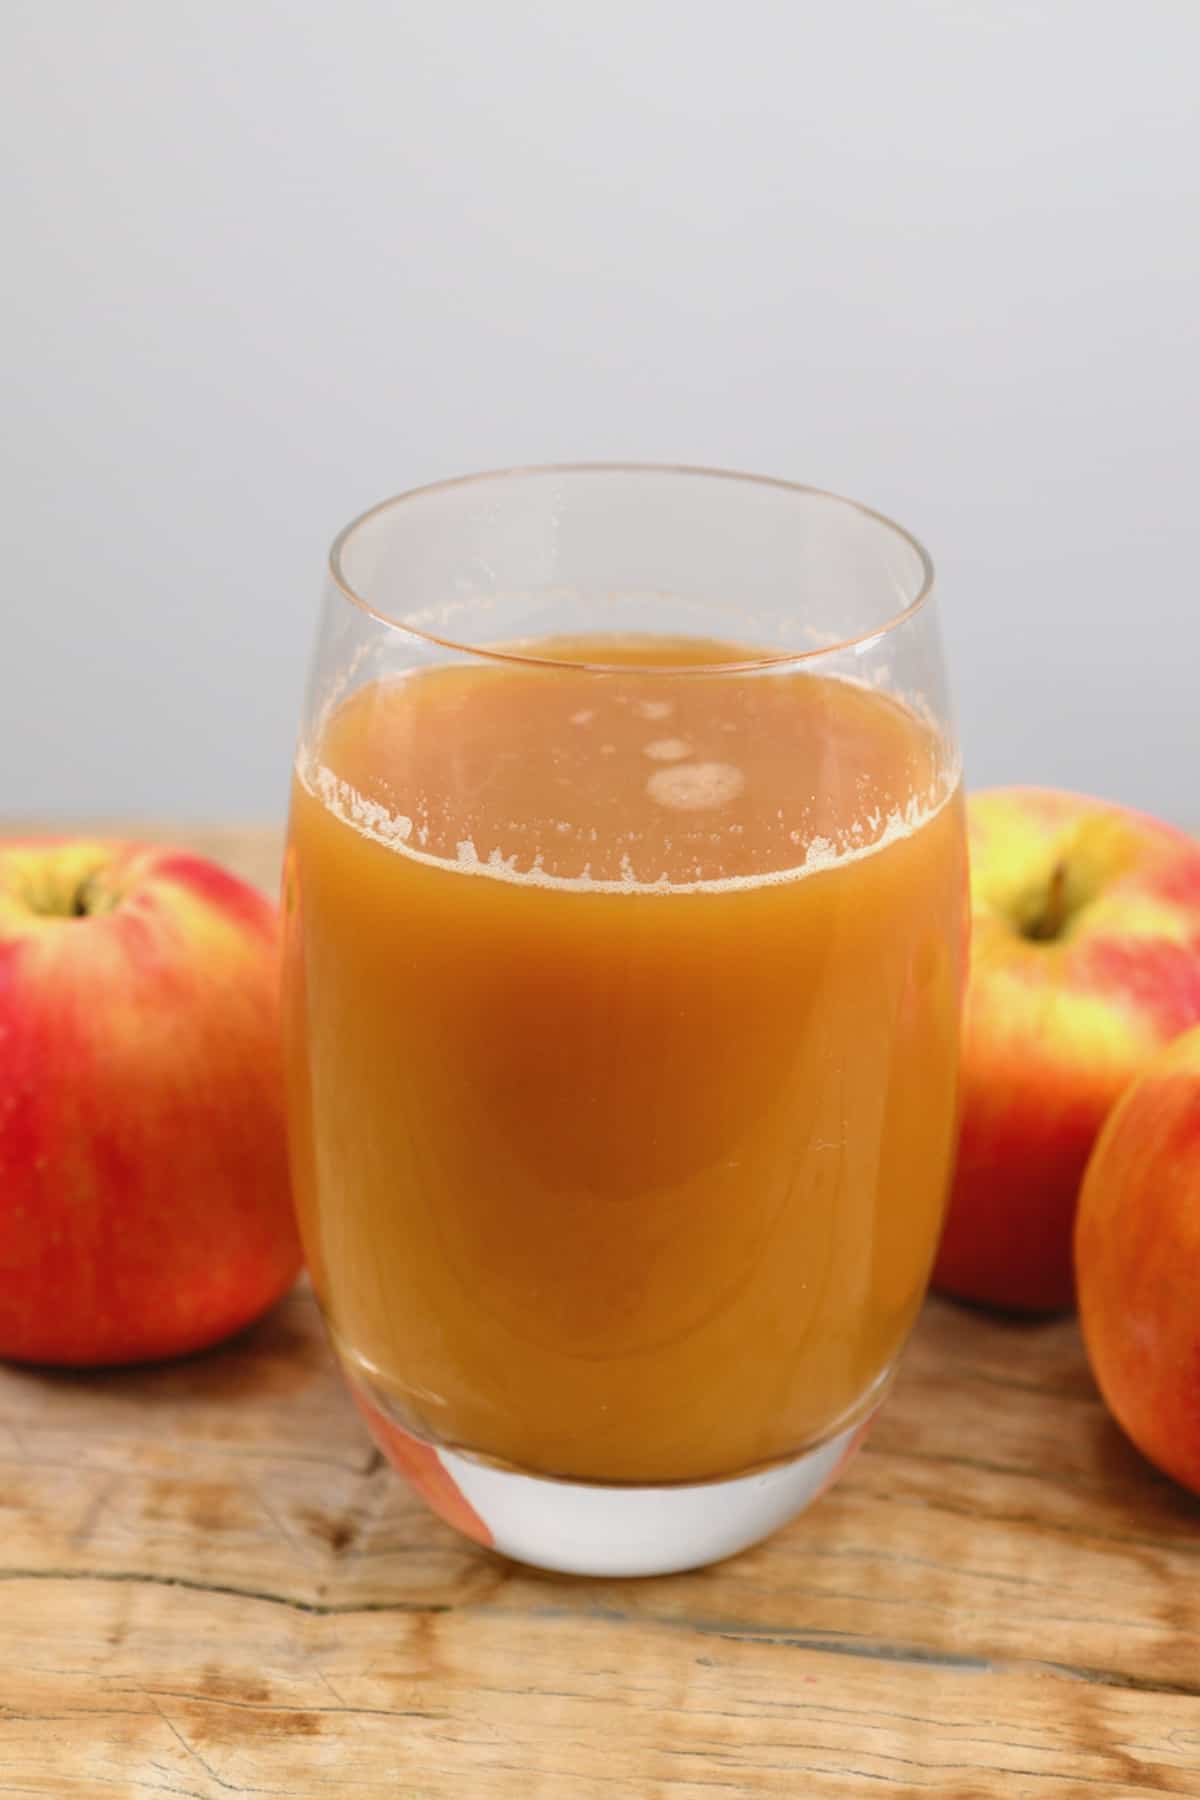 How to Make Apple Juice (With and Without Juicer)